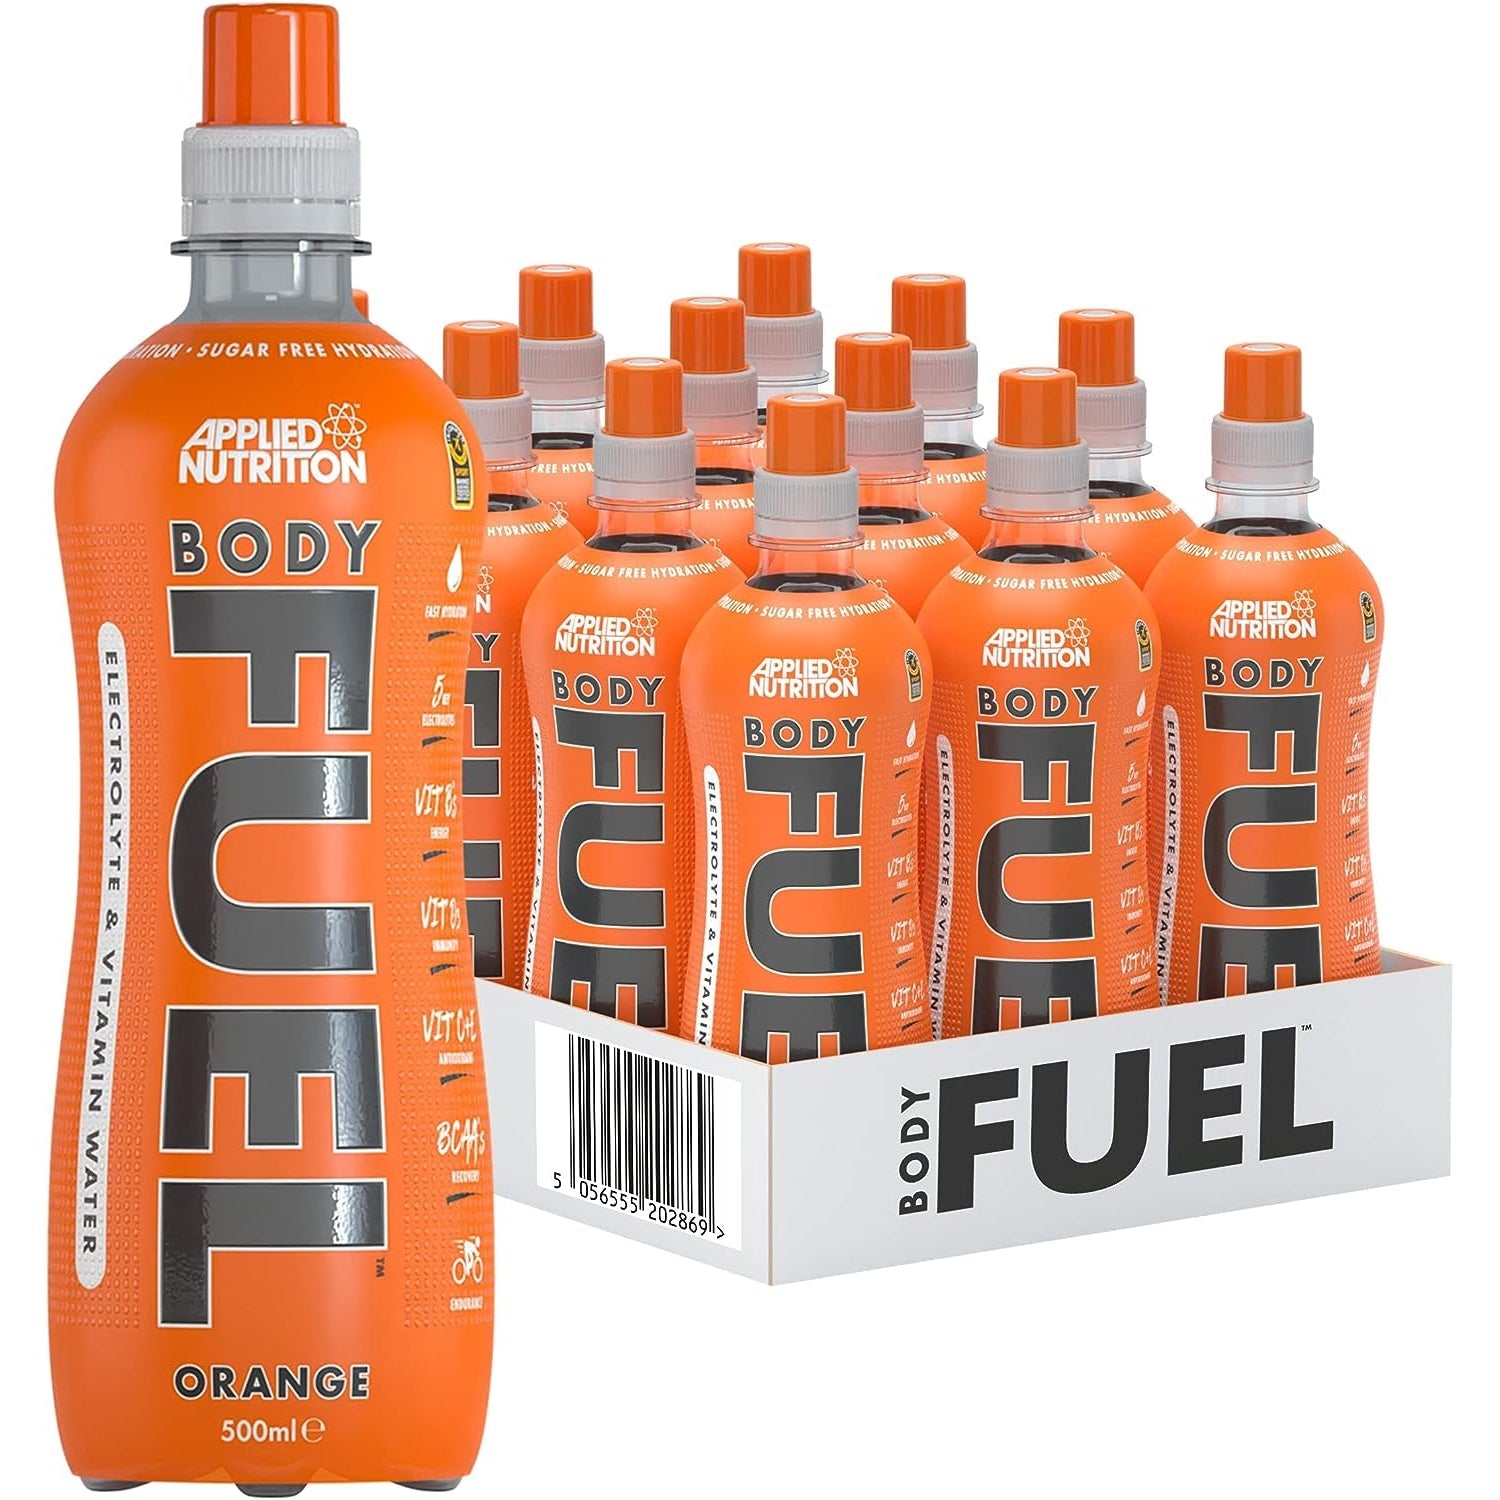 Applied Nutrition Body Fuel Electrolyte & Vitamin Water with BCAA 500ml Orange